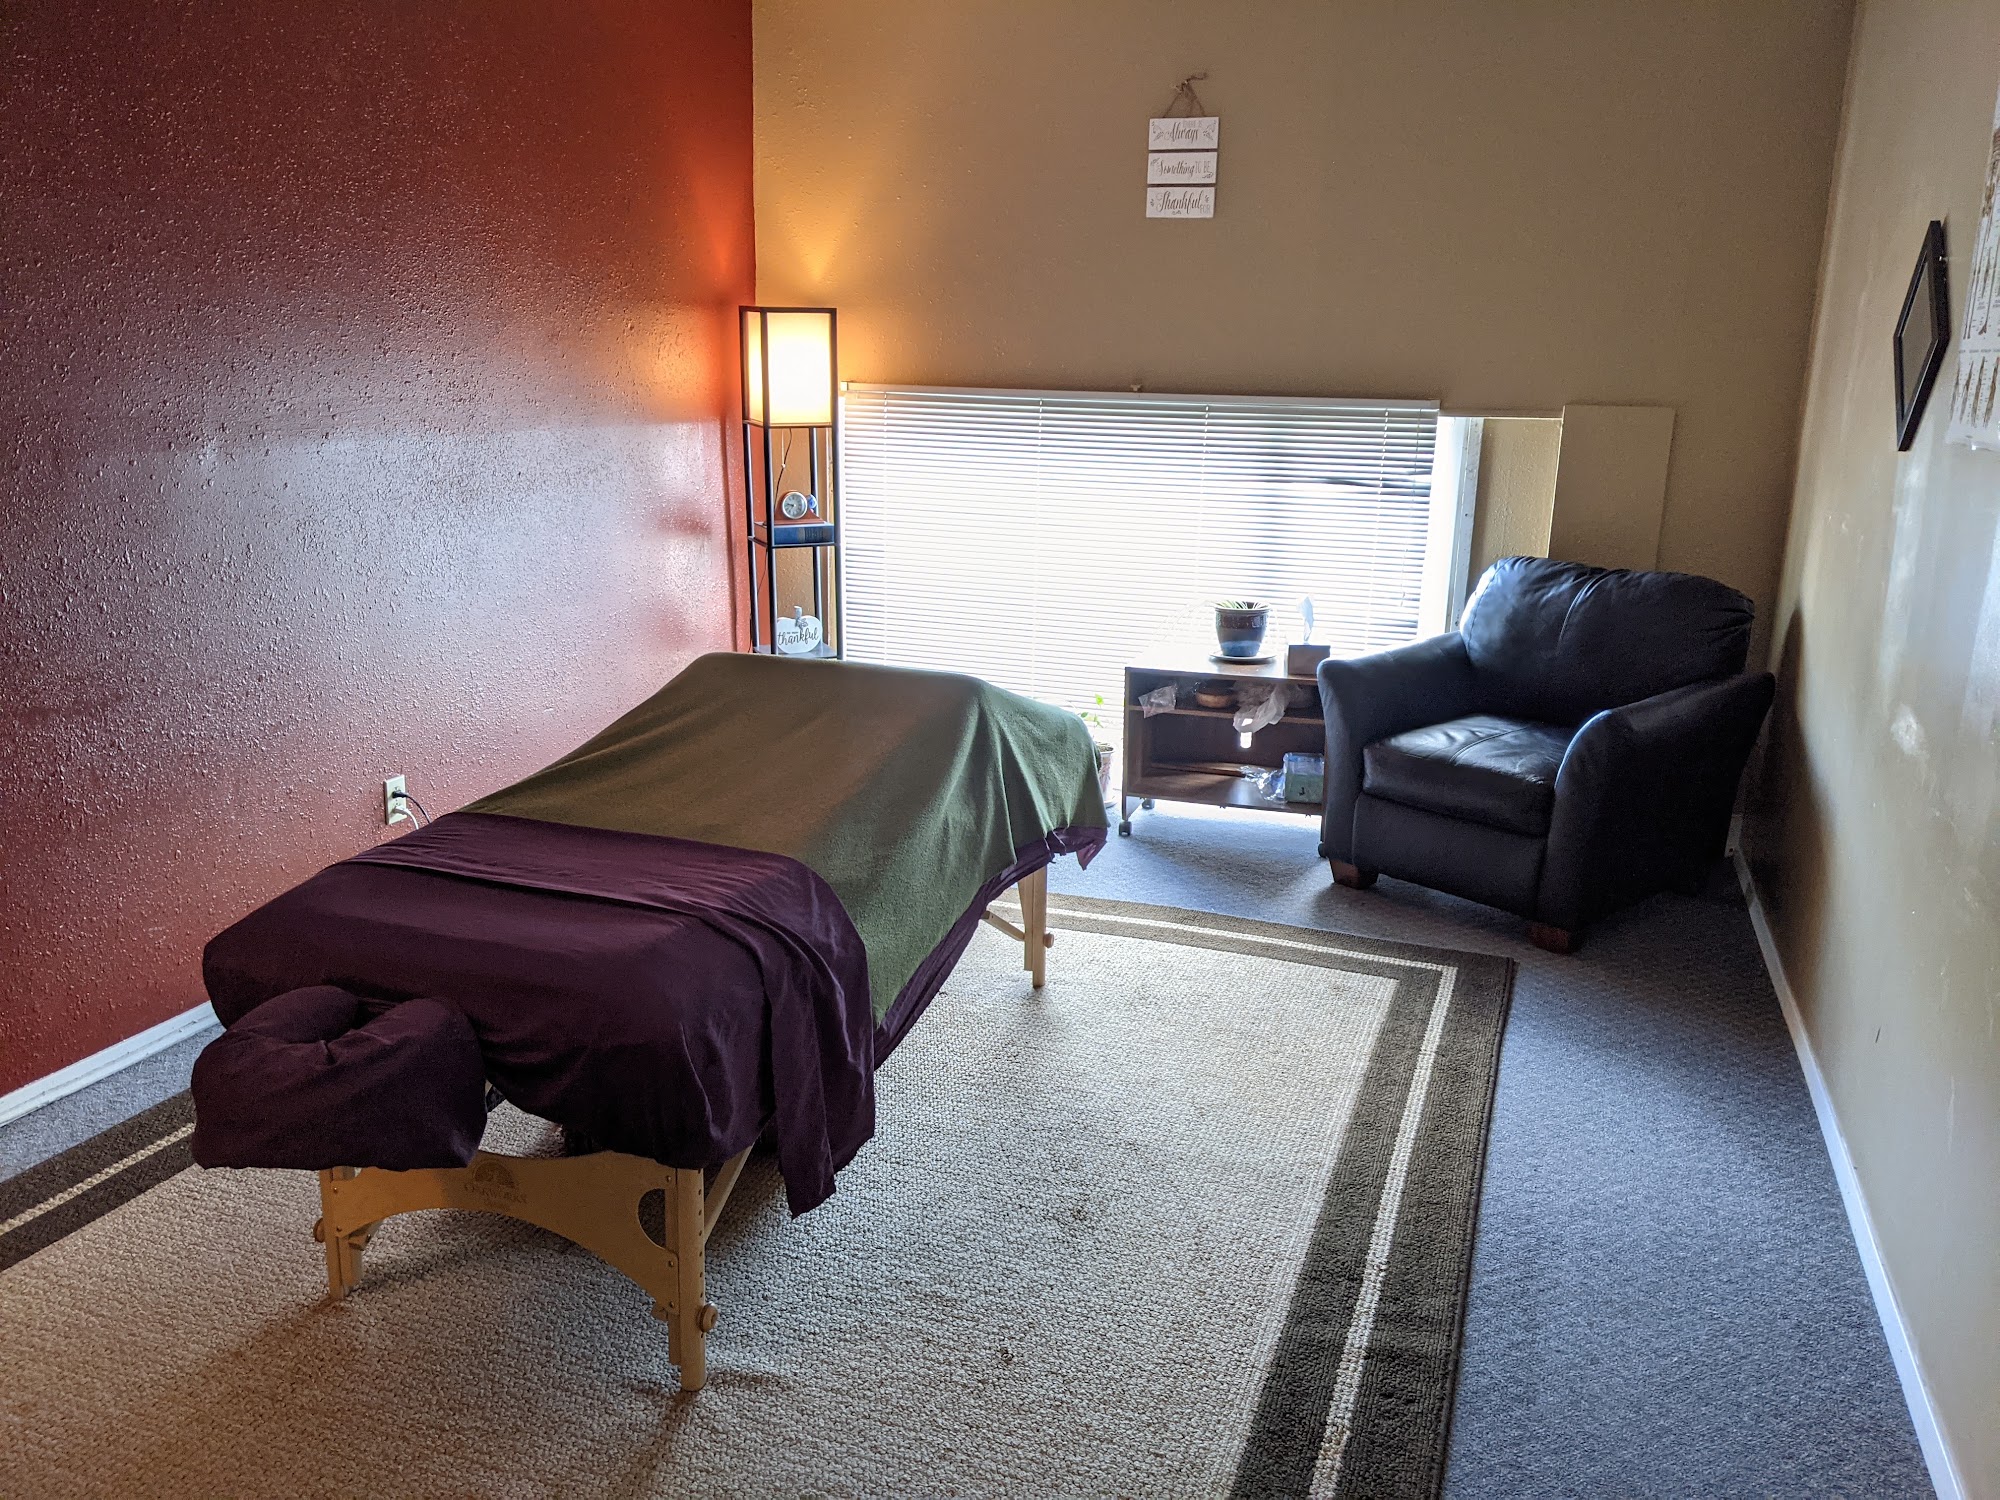 My Time Massage 701 E Commercial St, Weiser Idaho 83672